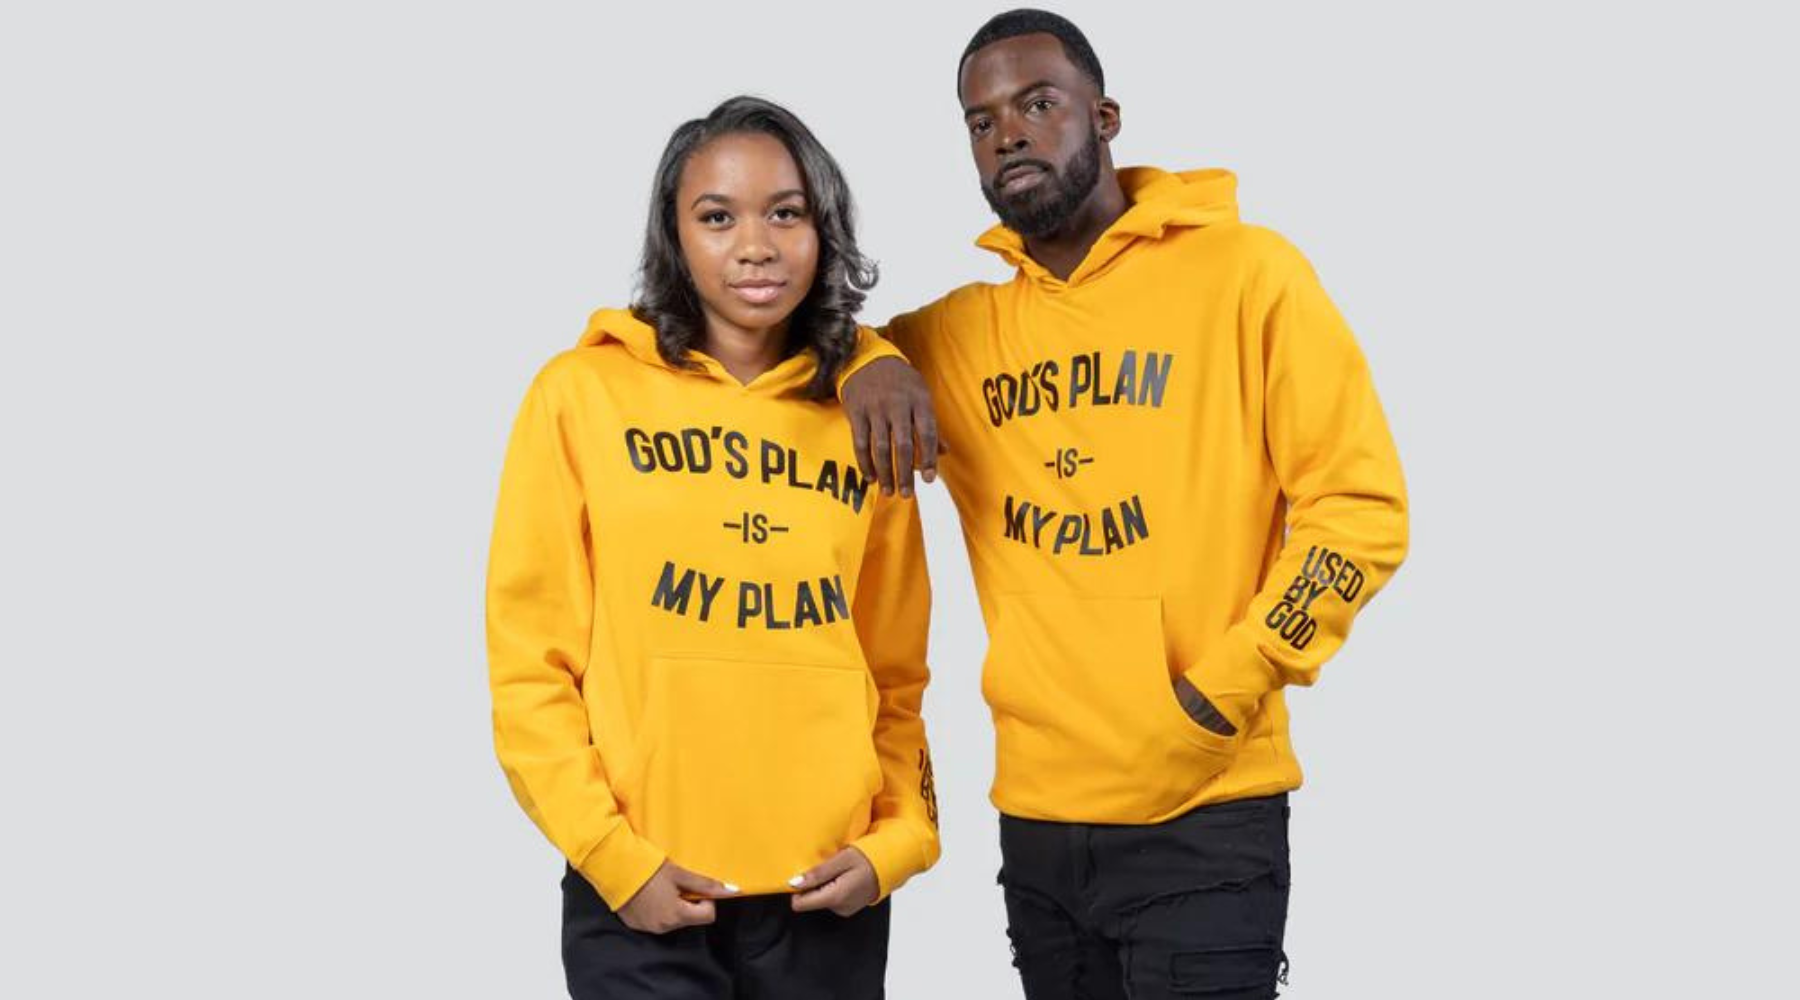 God's Plan My Plan, Christian Clothing, Christian Hoodie, God Is Dope, Elevated Faith, Red Letter Clothing, Christian Apparel, Christian T-Shirts, Christian Shirts, Christian Jewelry, Christian Clothing, Christian Clothing T Shirts